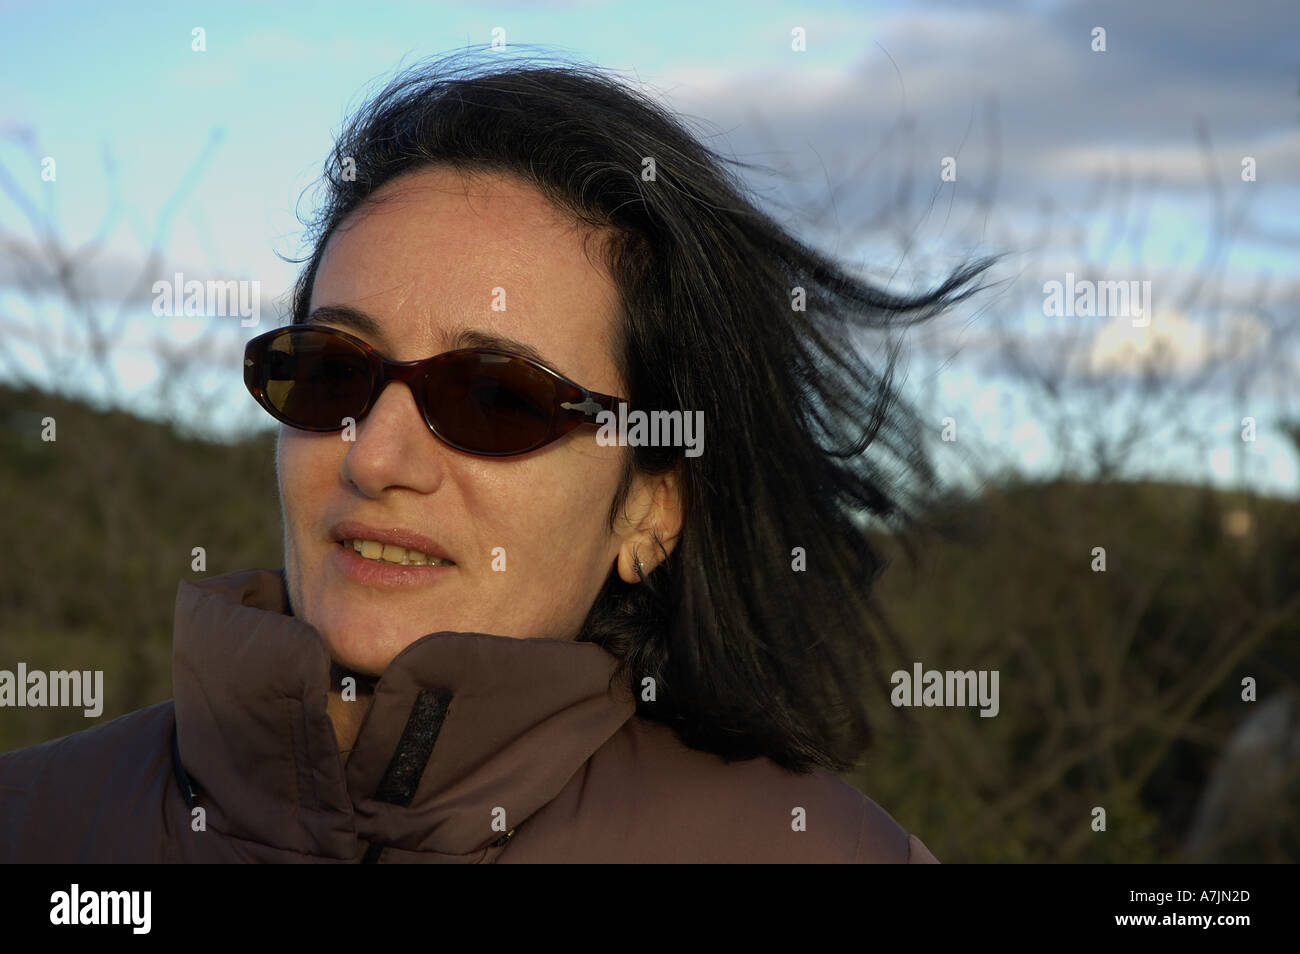 Portrait of a woman wearing sunglasses on a windy day. Stock Photo